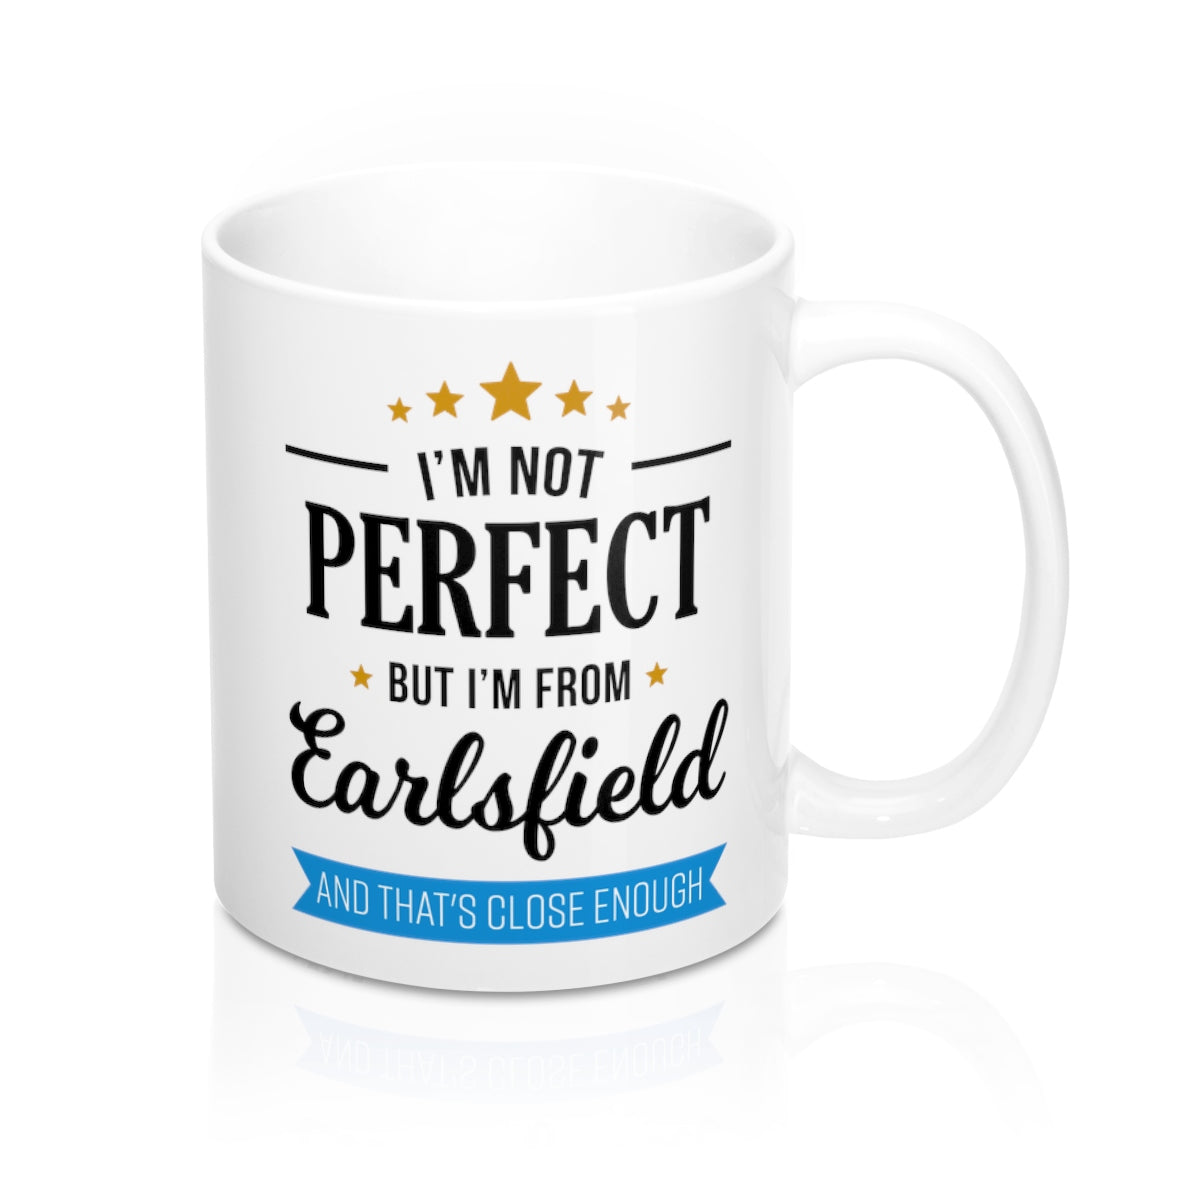 I'm Not Perfect But I'm From Earslfield Mug